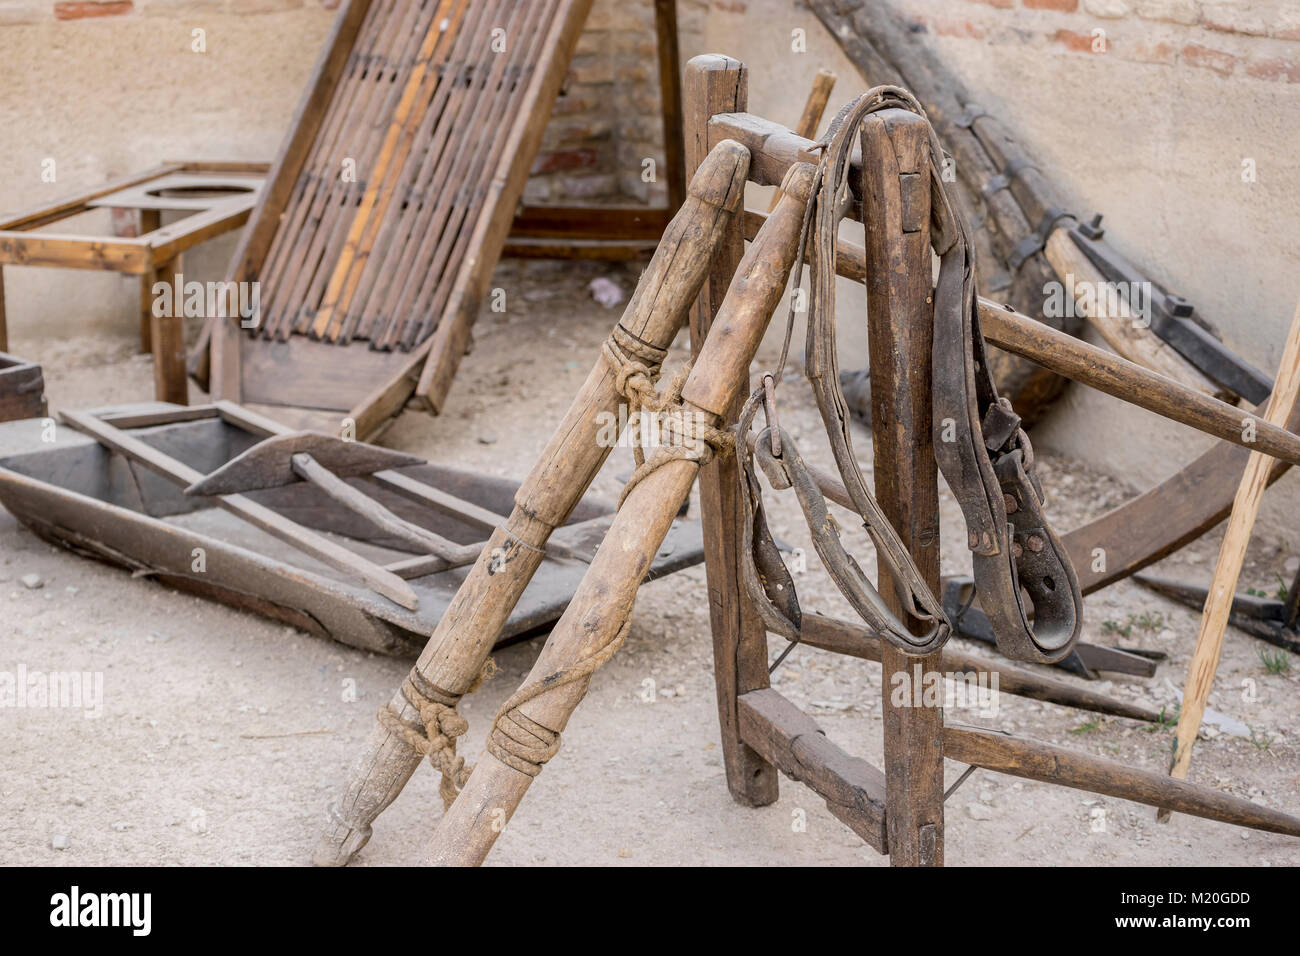 tools and utensils of medieval agriculture, ancient European farming instruments Stock Photo